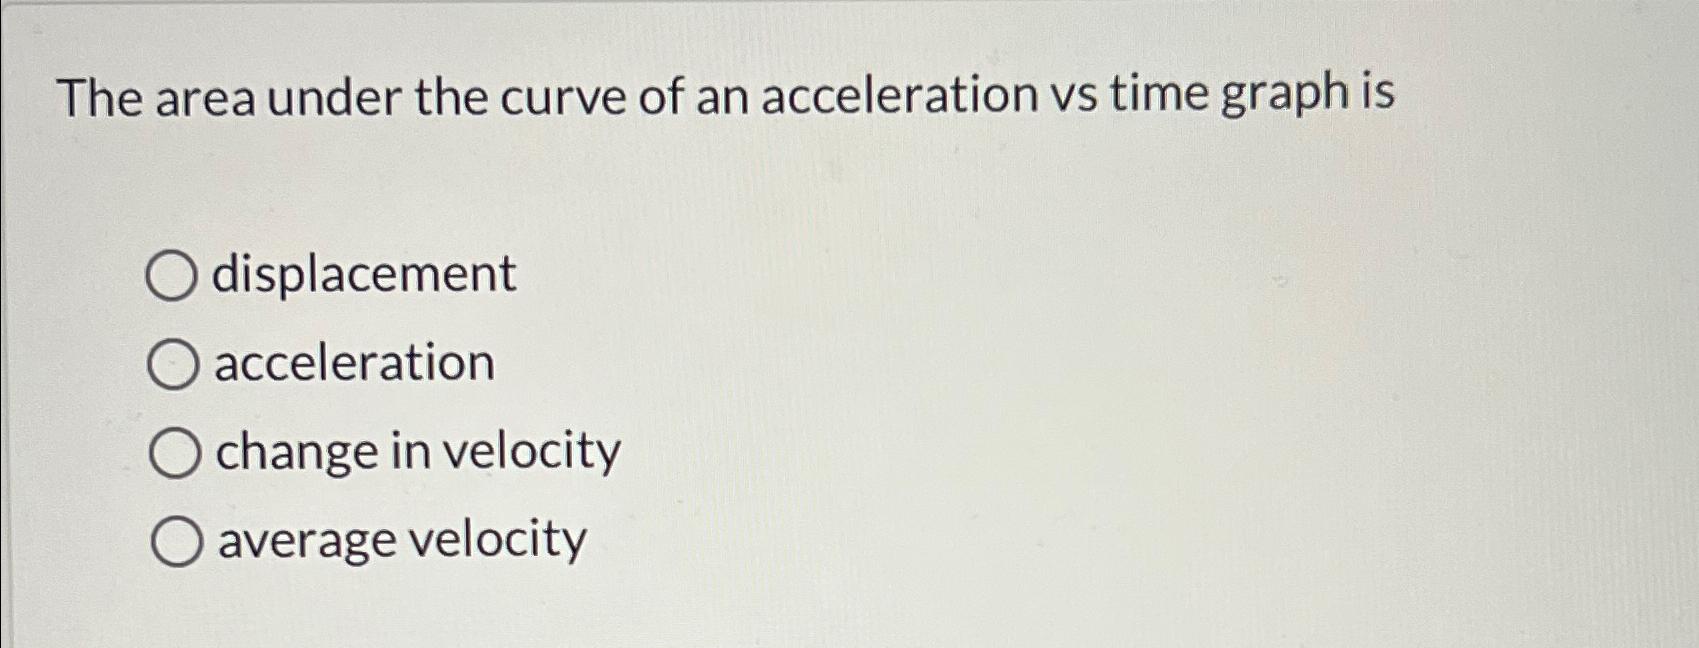 The area under the curve of an acceleration vs time graph is displacement O acceleration O change in velocity